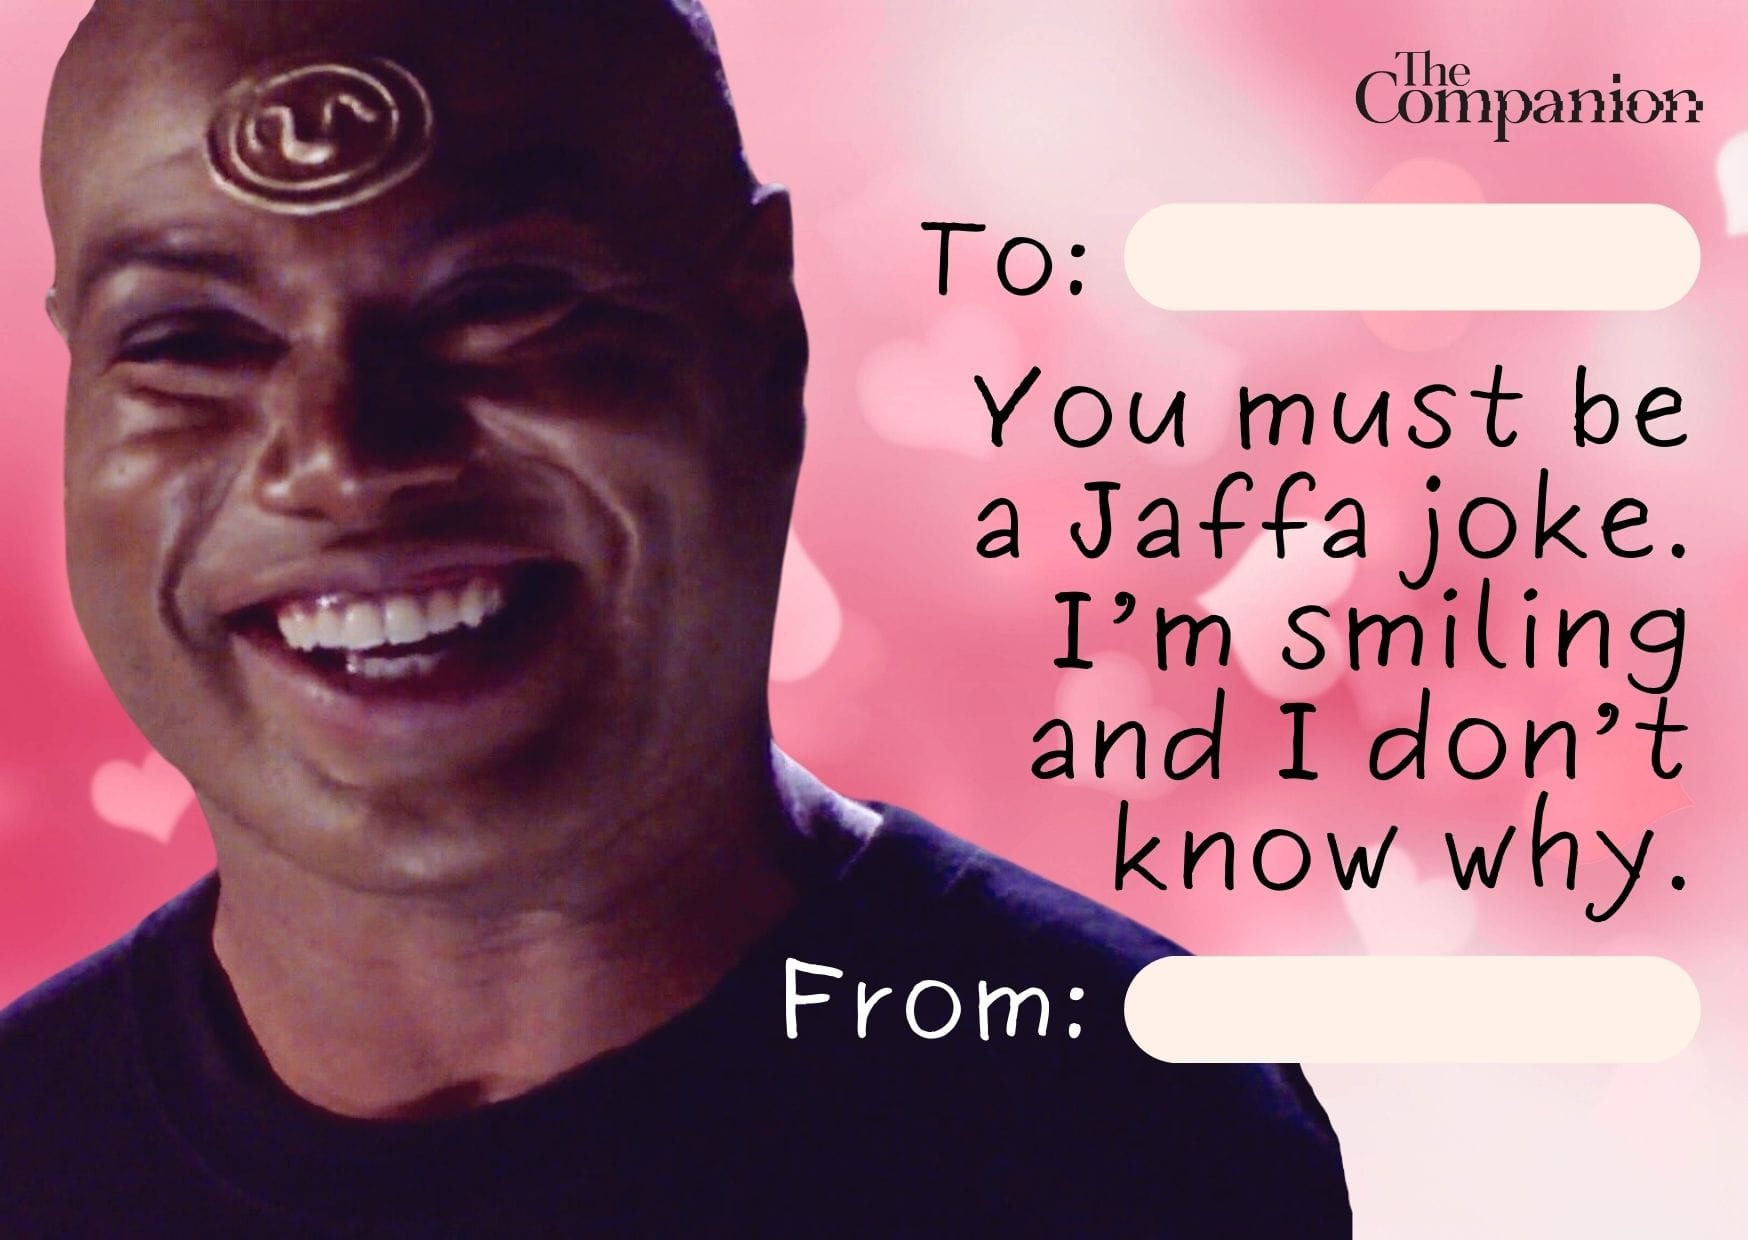 Stargate | 14 Valentine’s Cards to Send to Your First Prime